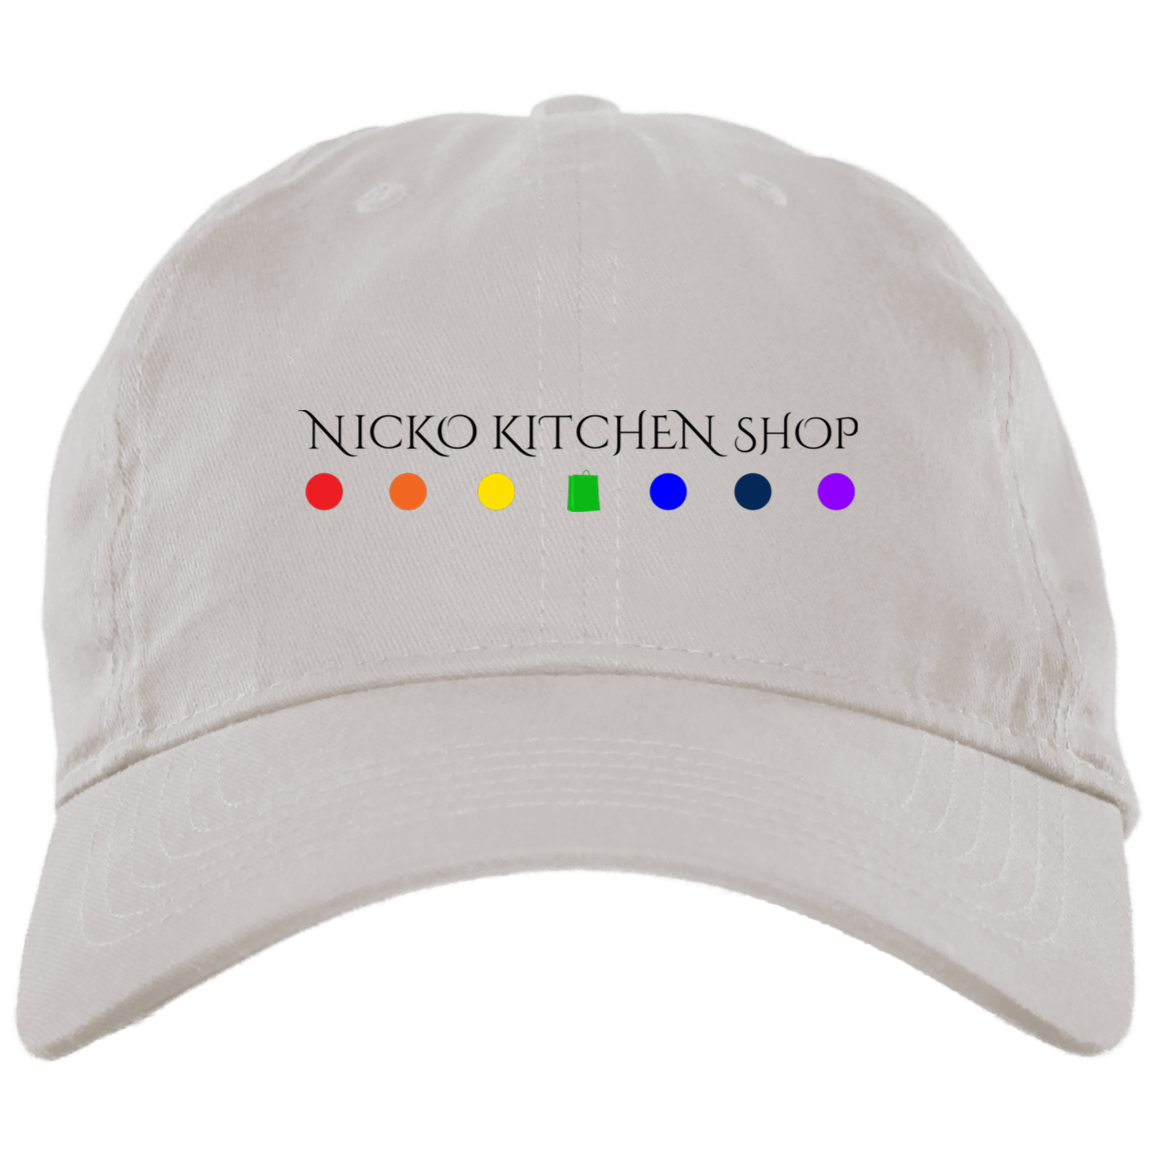 Nicko Kitchen Shop Brushed Twill Unstructured Dad Cap